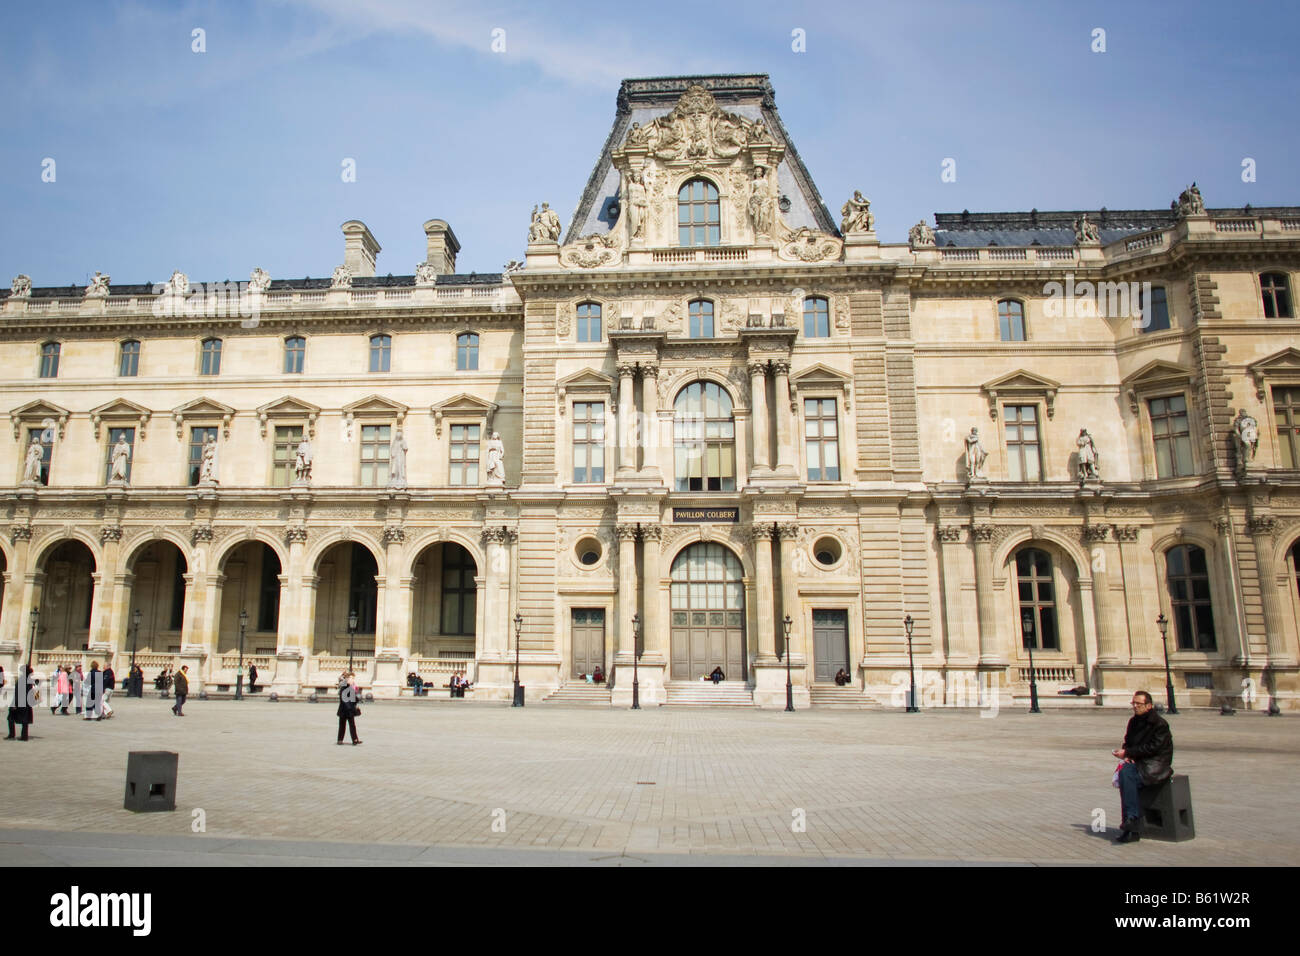 A view from a courtyard of the Musee du Louvre in Paris Stock Photo